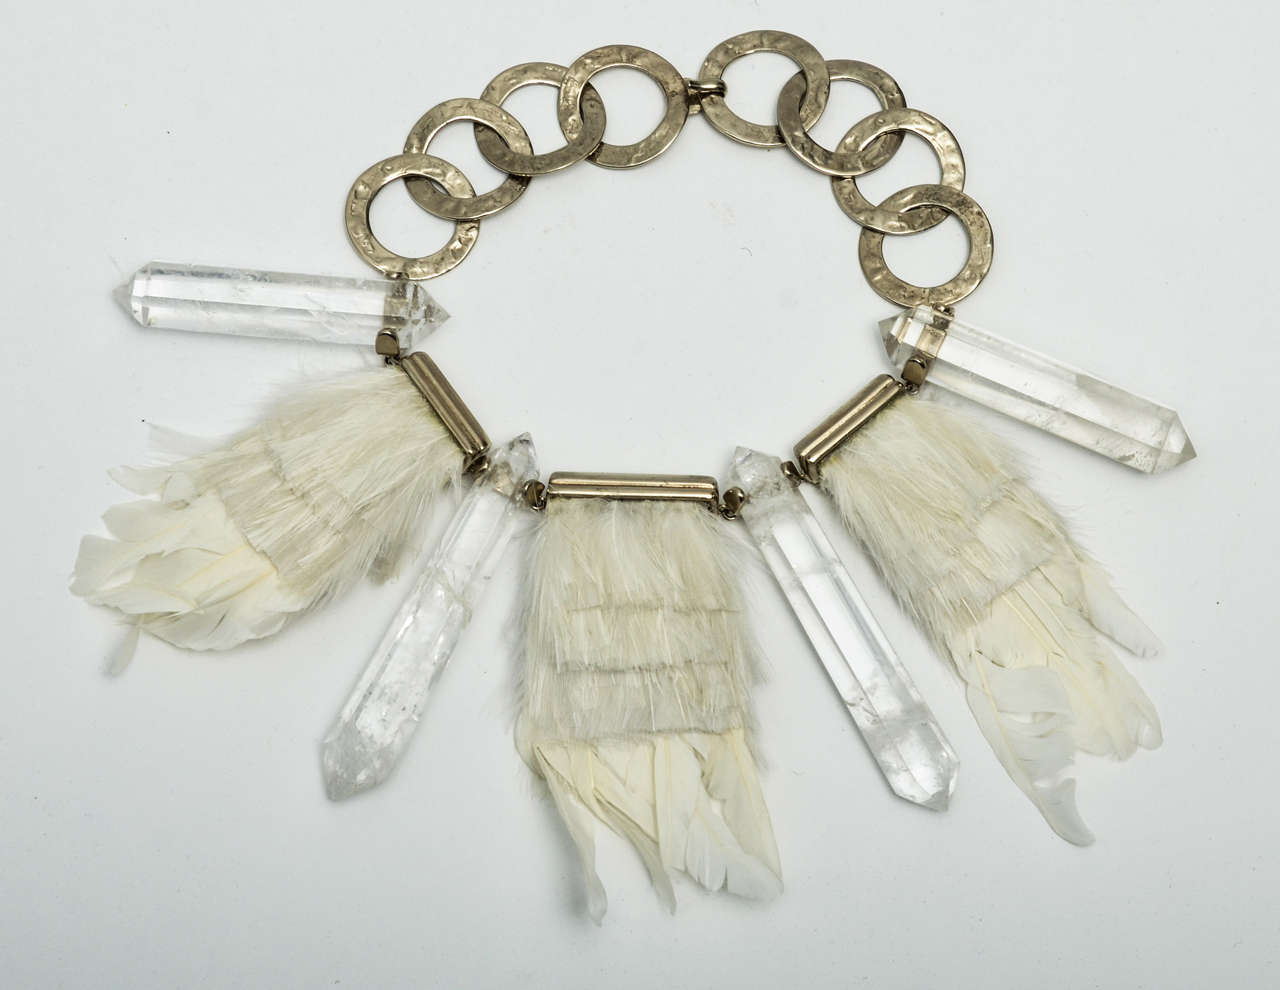 Superb hammered-silver links and bars with four crystal double-pointed obelisks, separated by white feathers held by silver bars. A statement necklace of geometry, textures, materials and glamor. Prominent label.